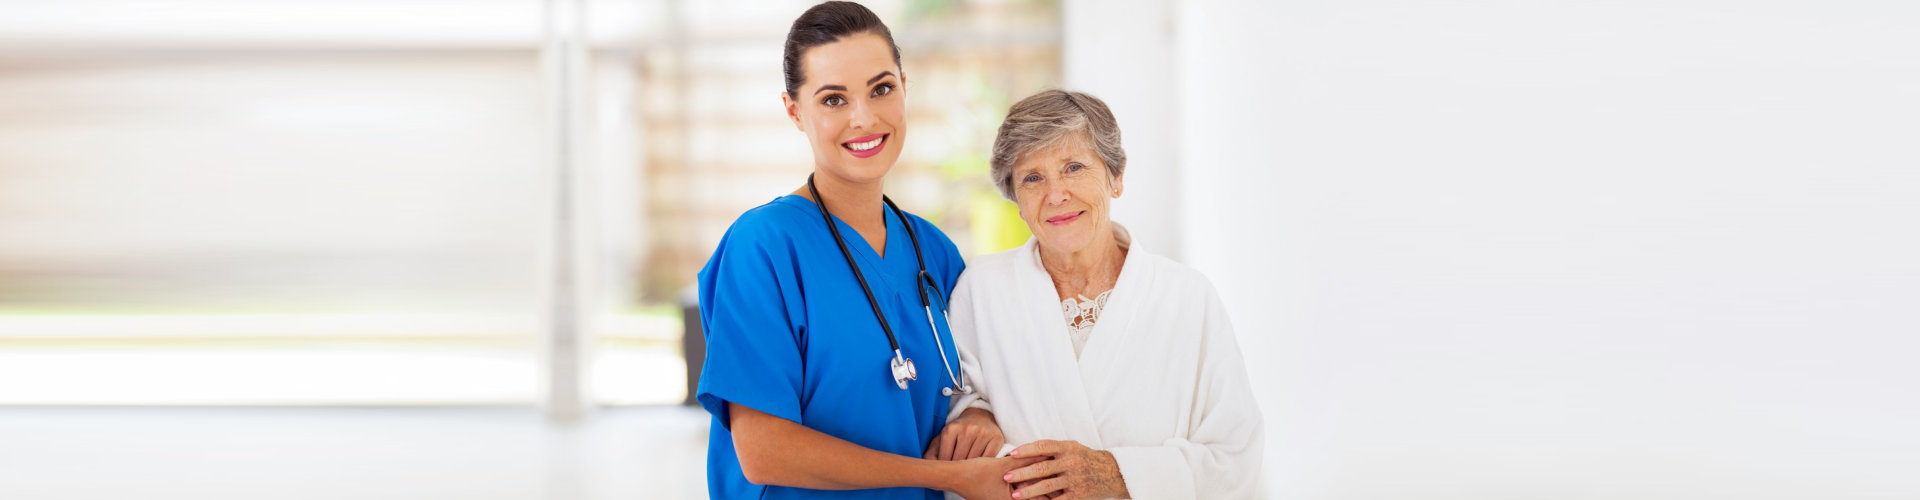 senior women and caring young nurse